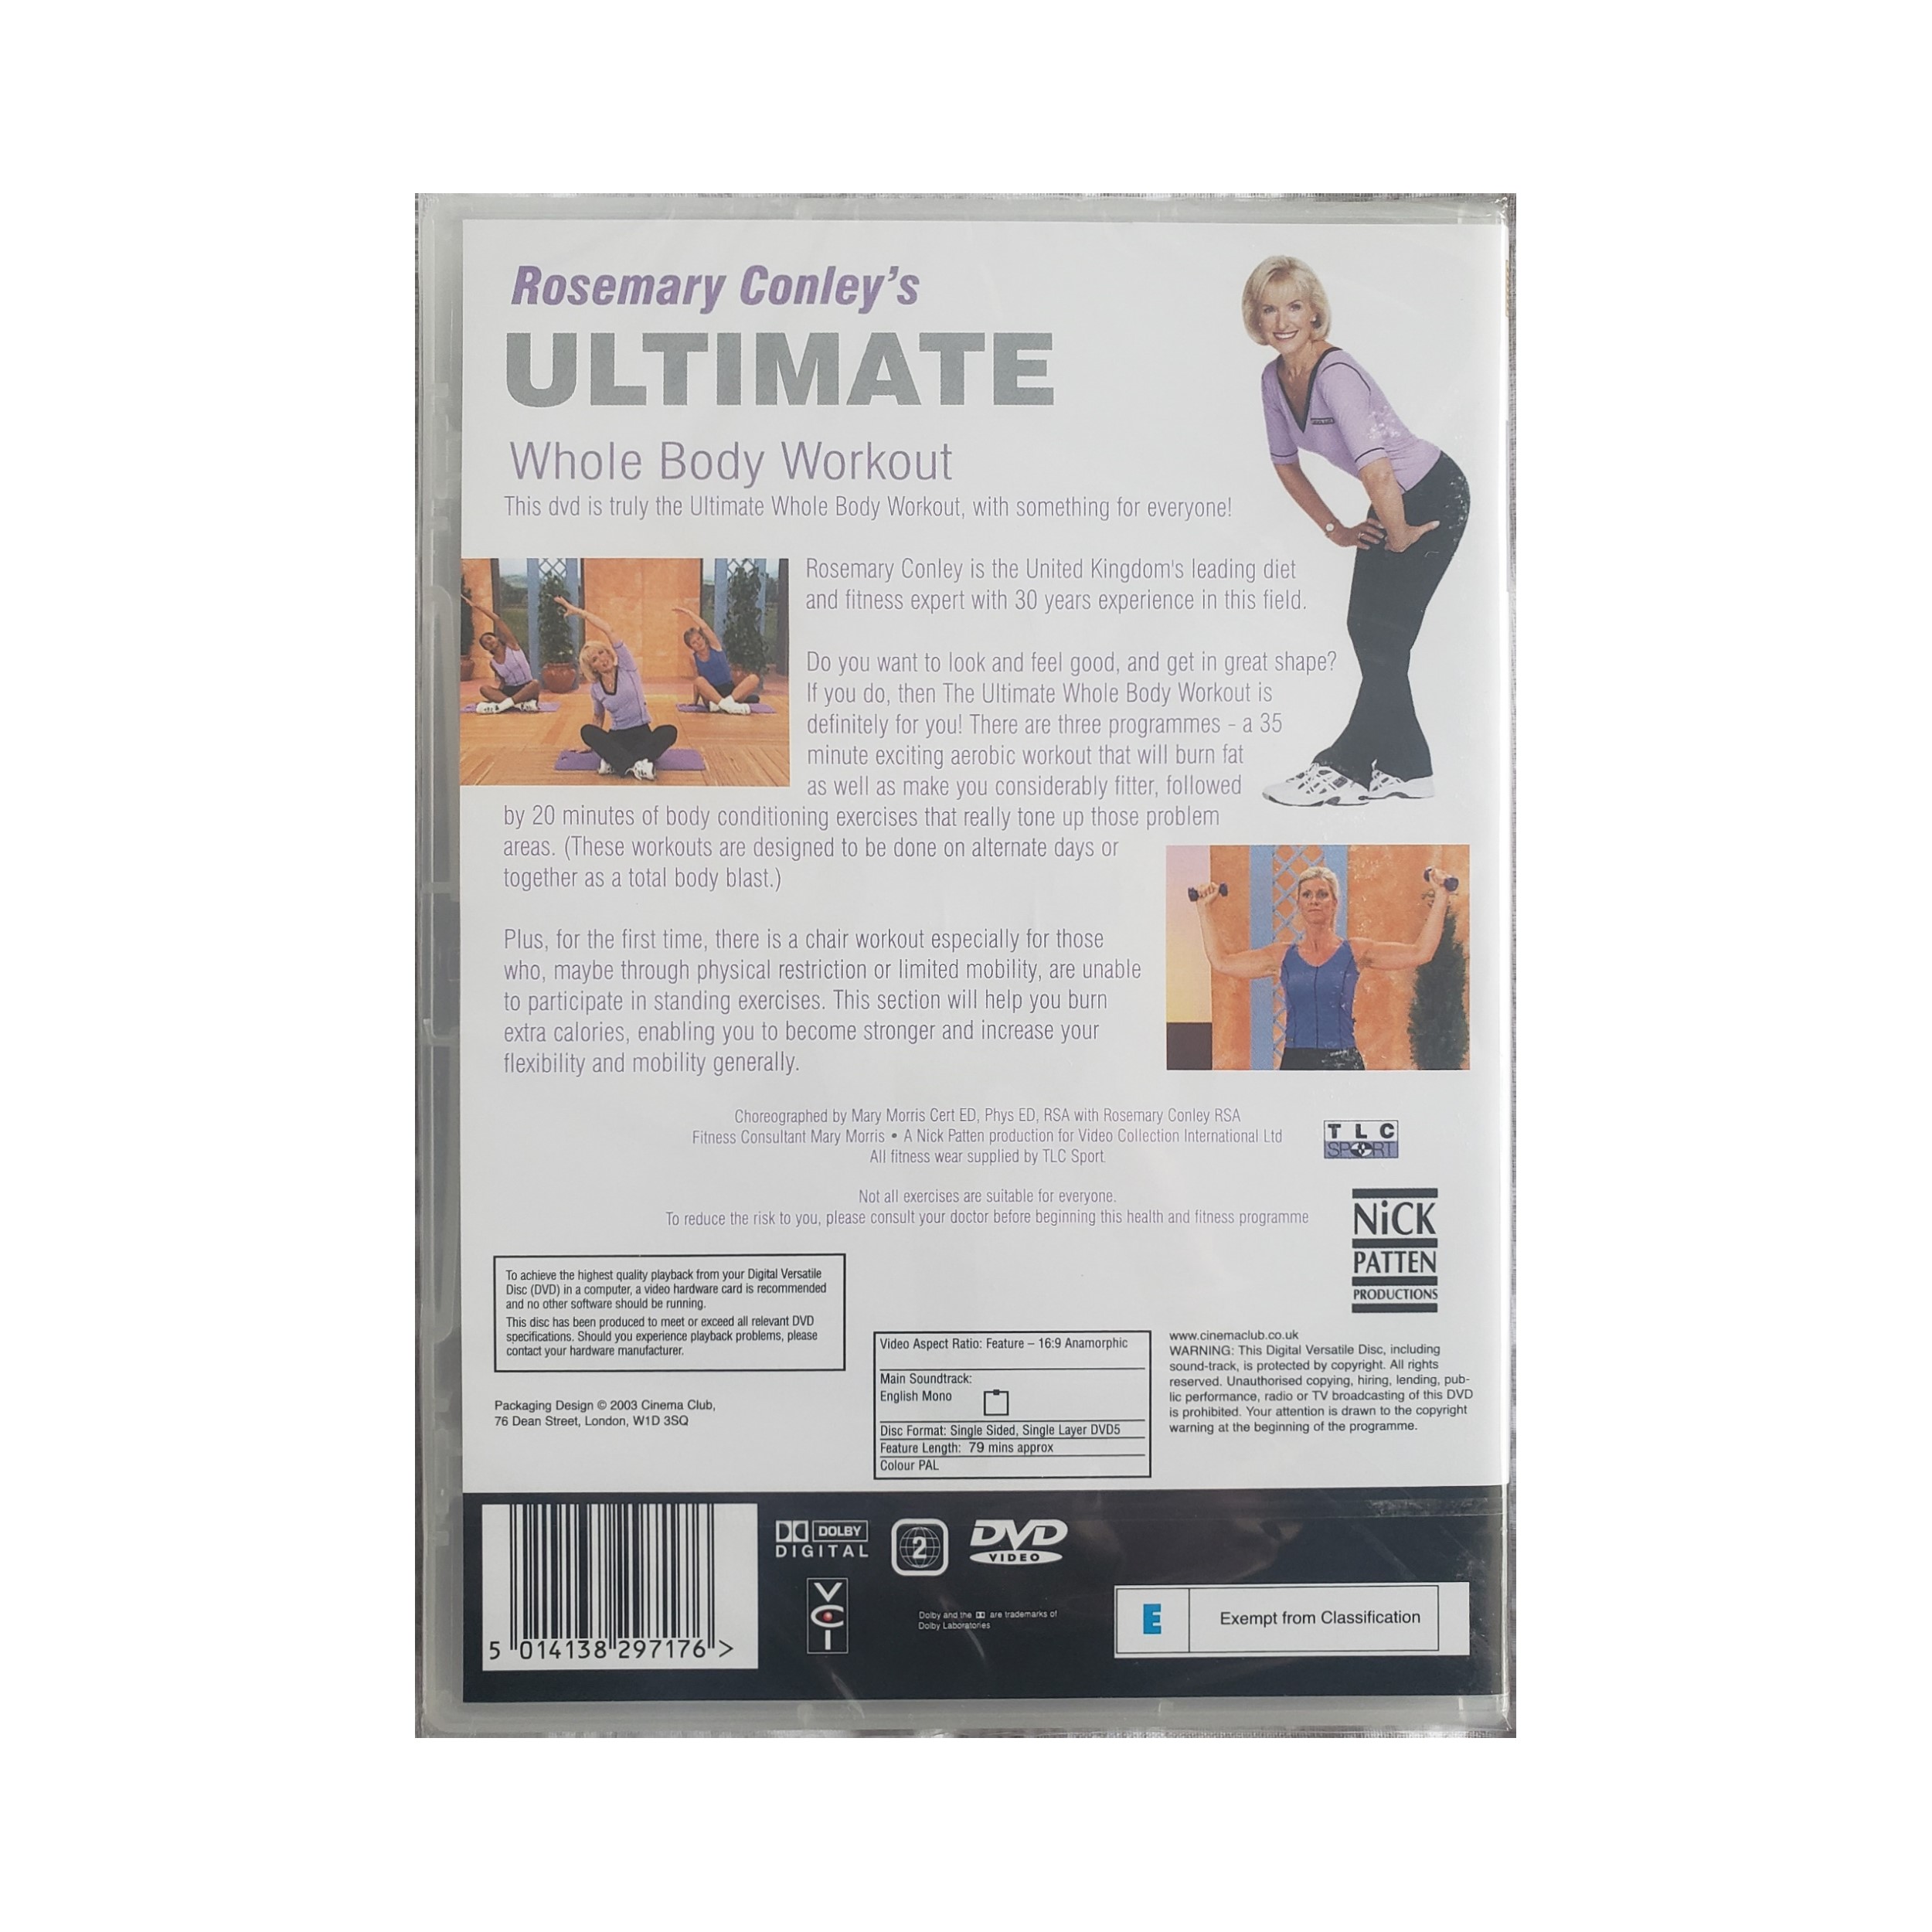 Image of the back cover of Rosemary Conley's Ultimate Whole Body Workout DVD